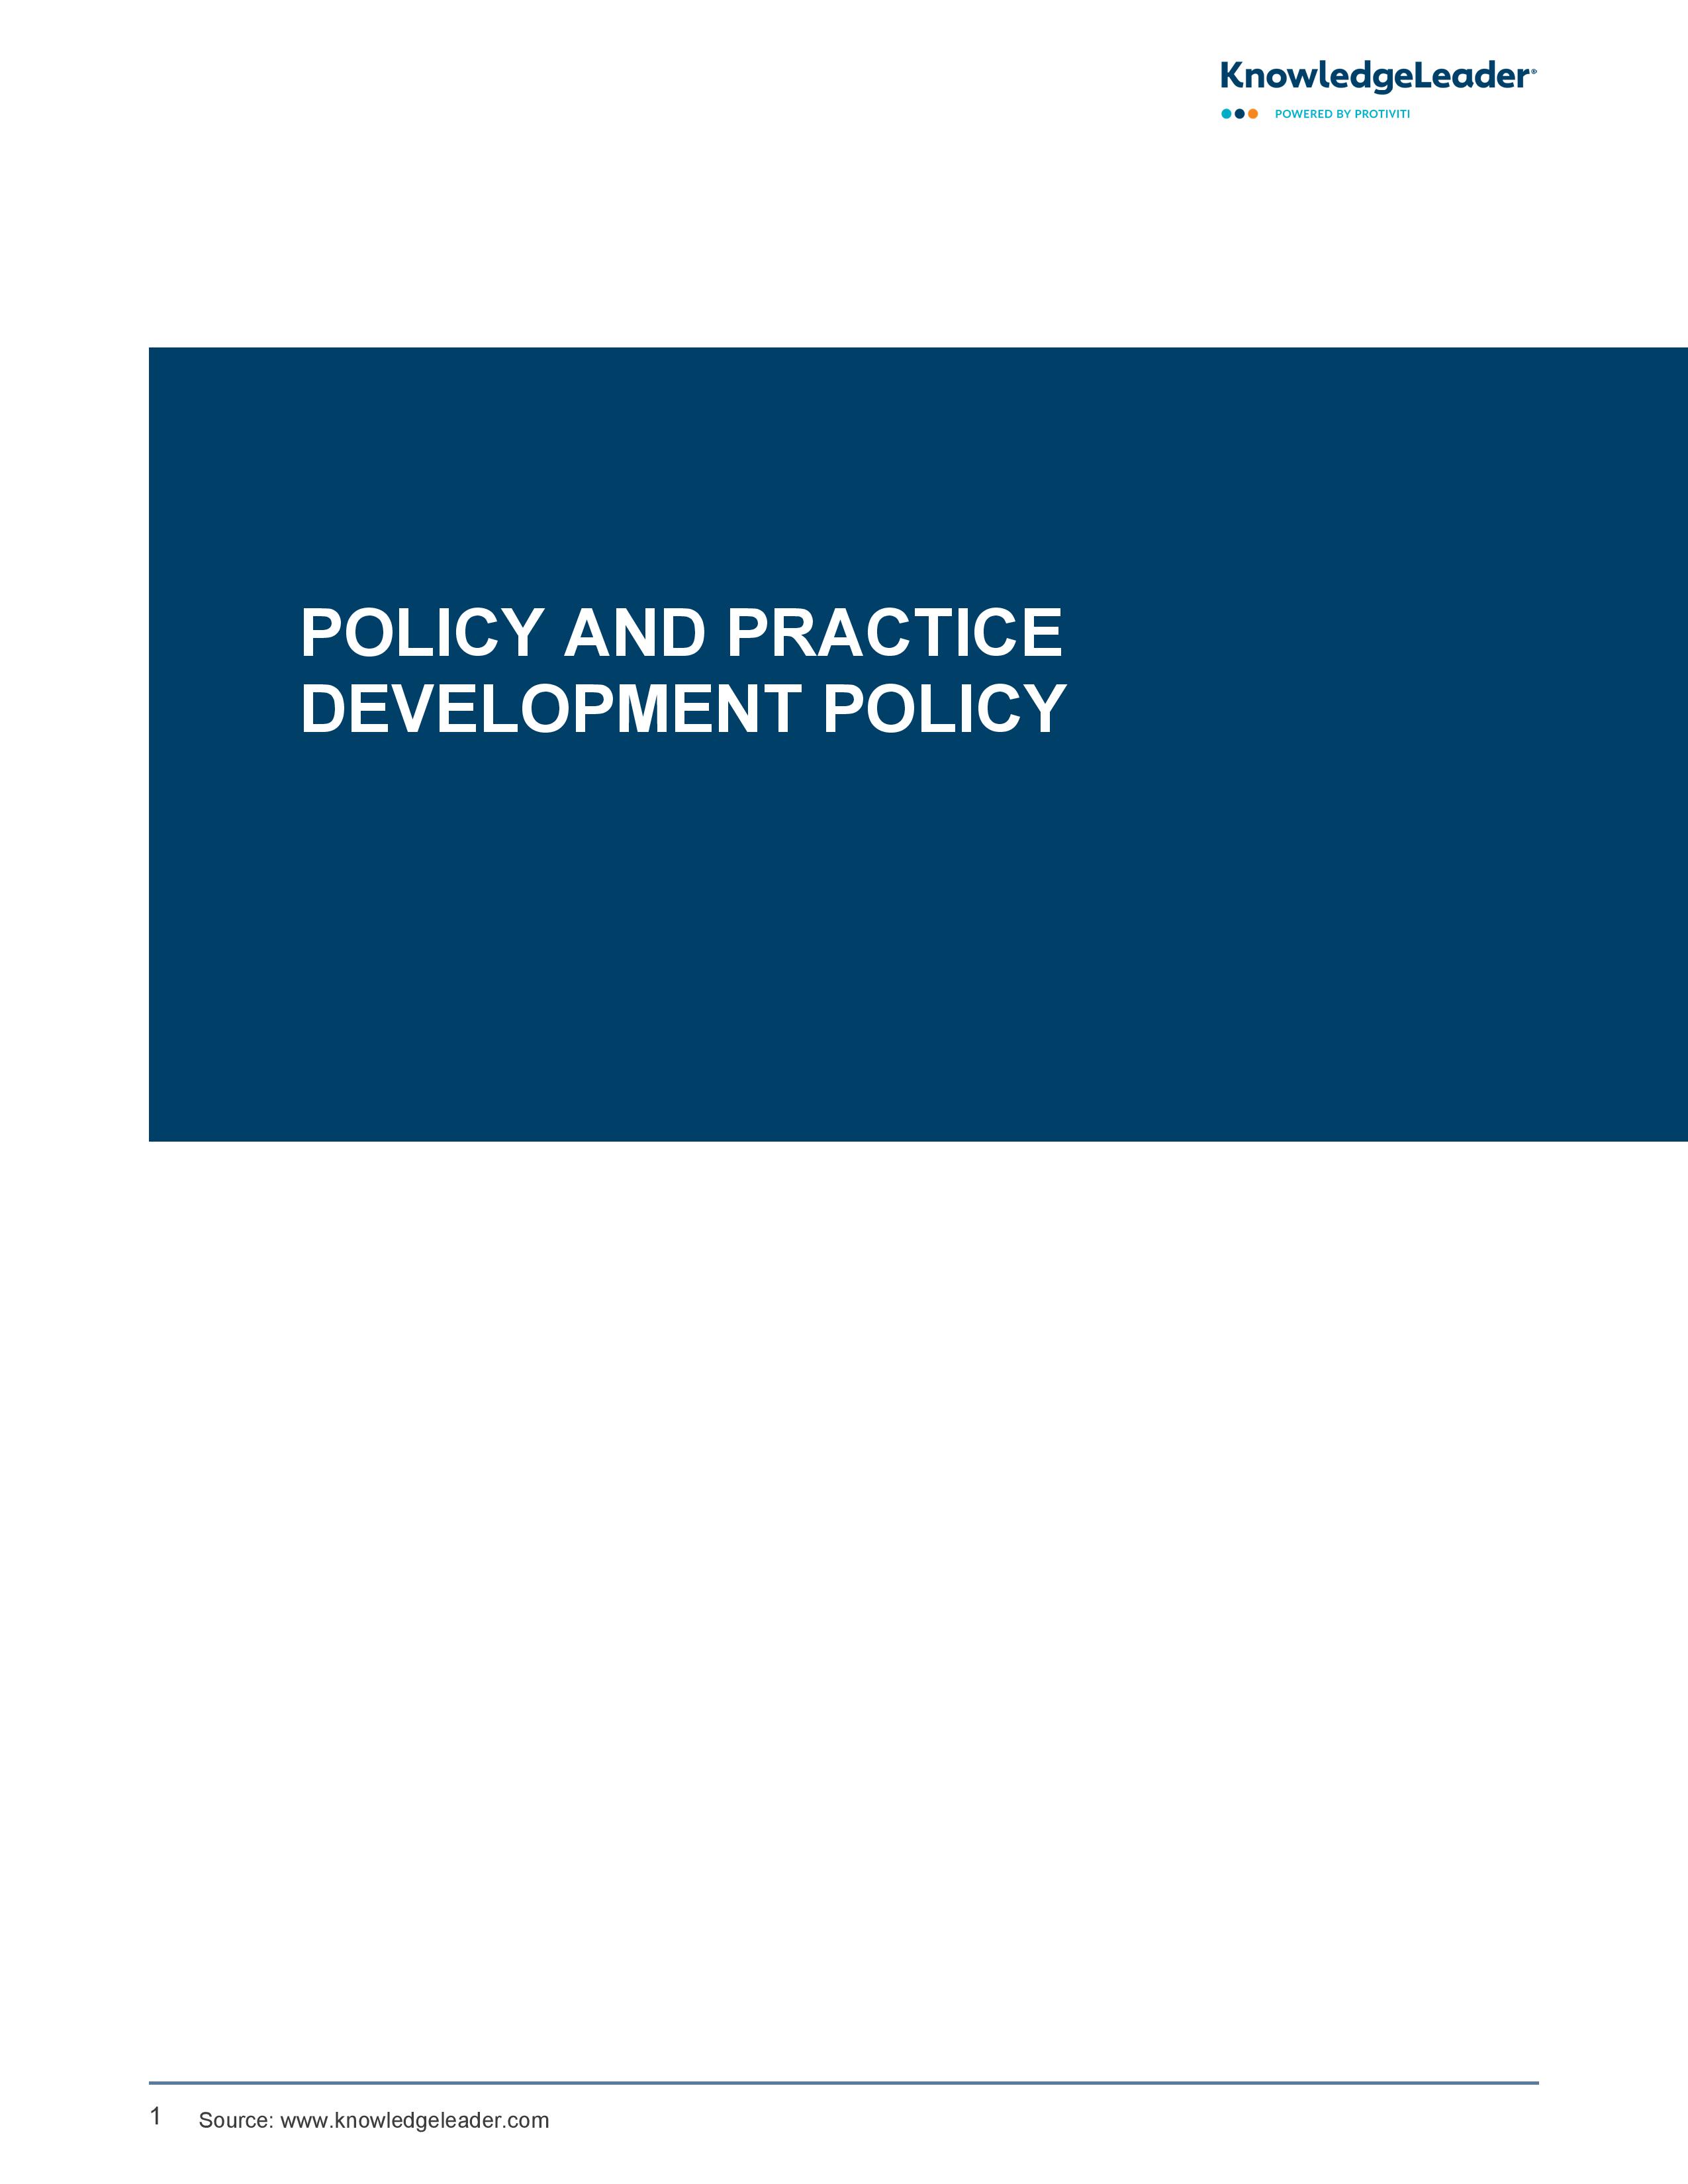 screenshot of the first page of Policy and Practice Development Policy